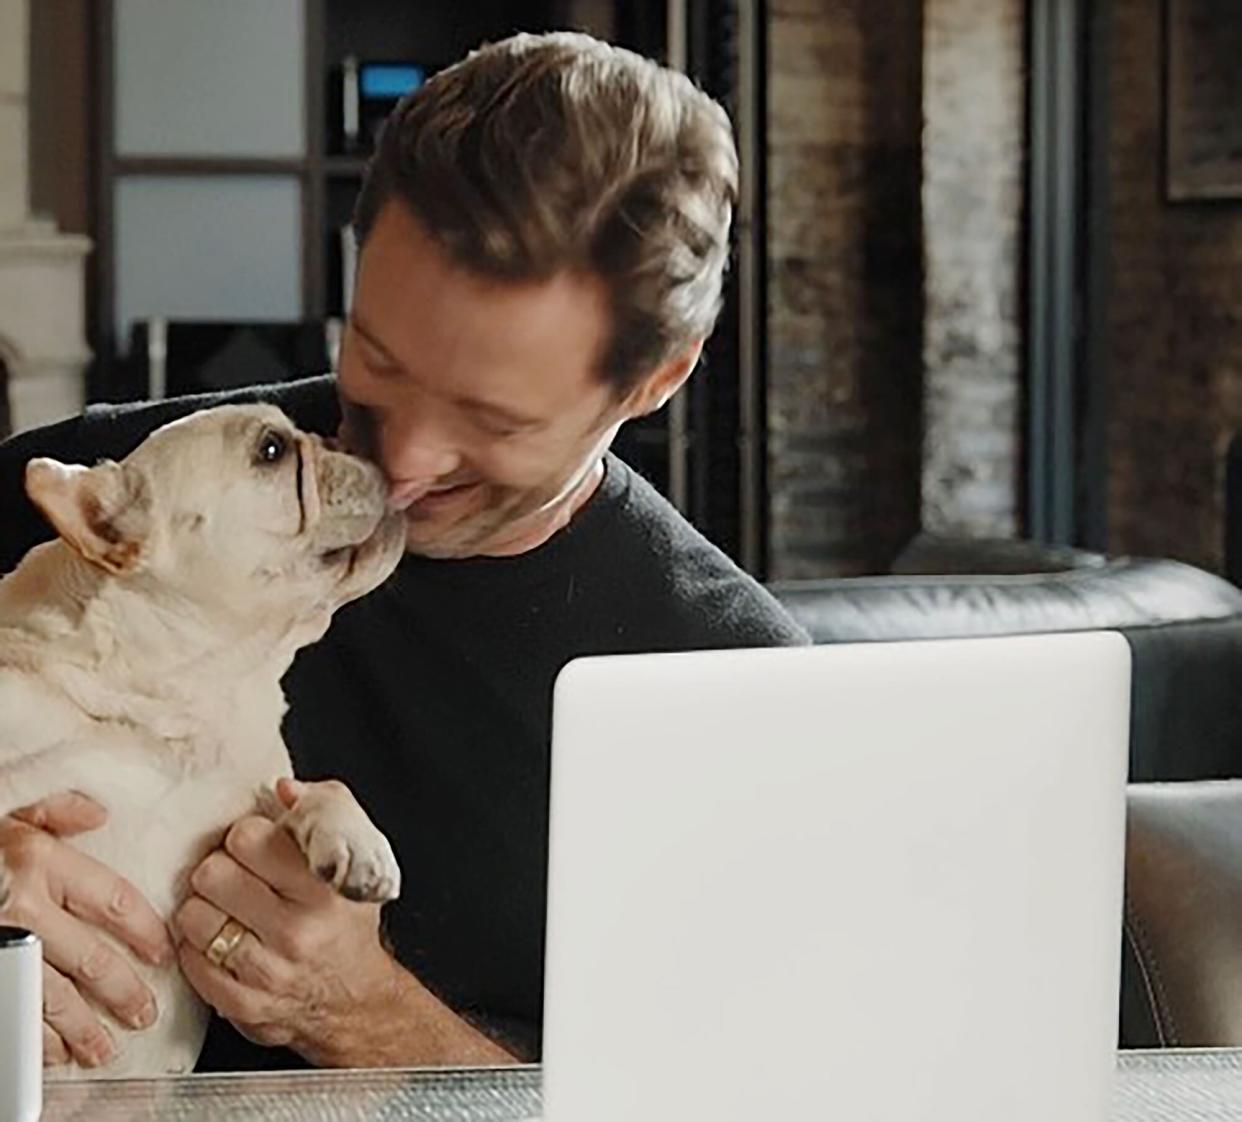 Hugh Jackman Announces His Dog, Dali 'Passed Away': 'It's a Very Sad Day for Our Family'. https://www.instagram.com/thehughjackman/